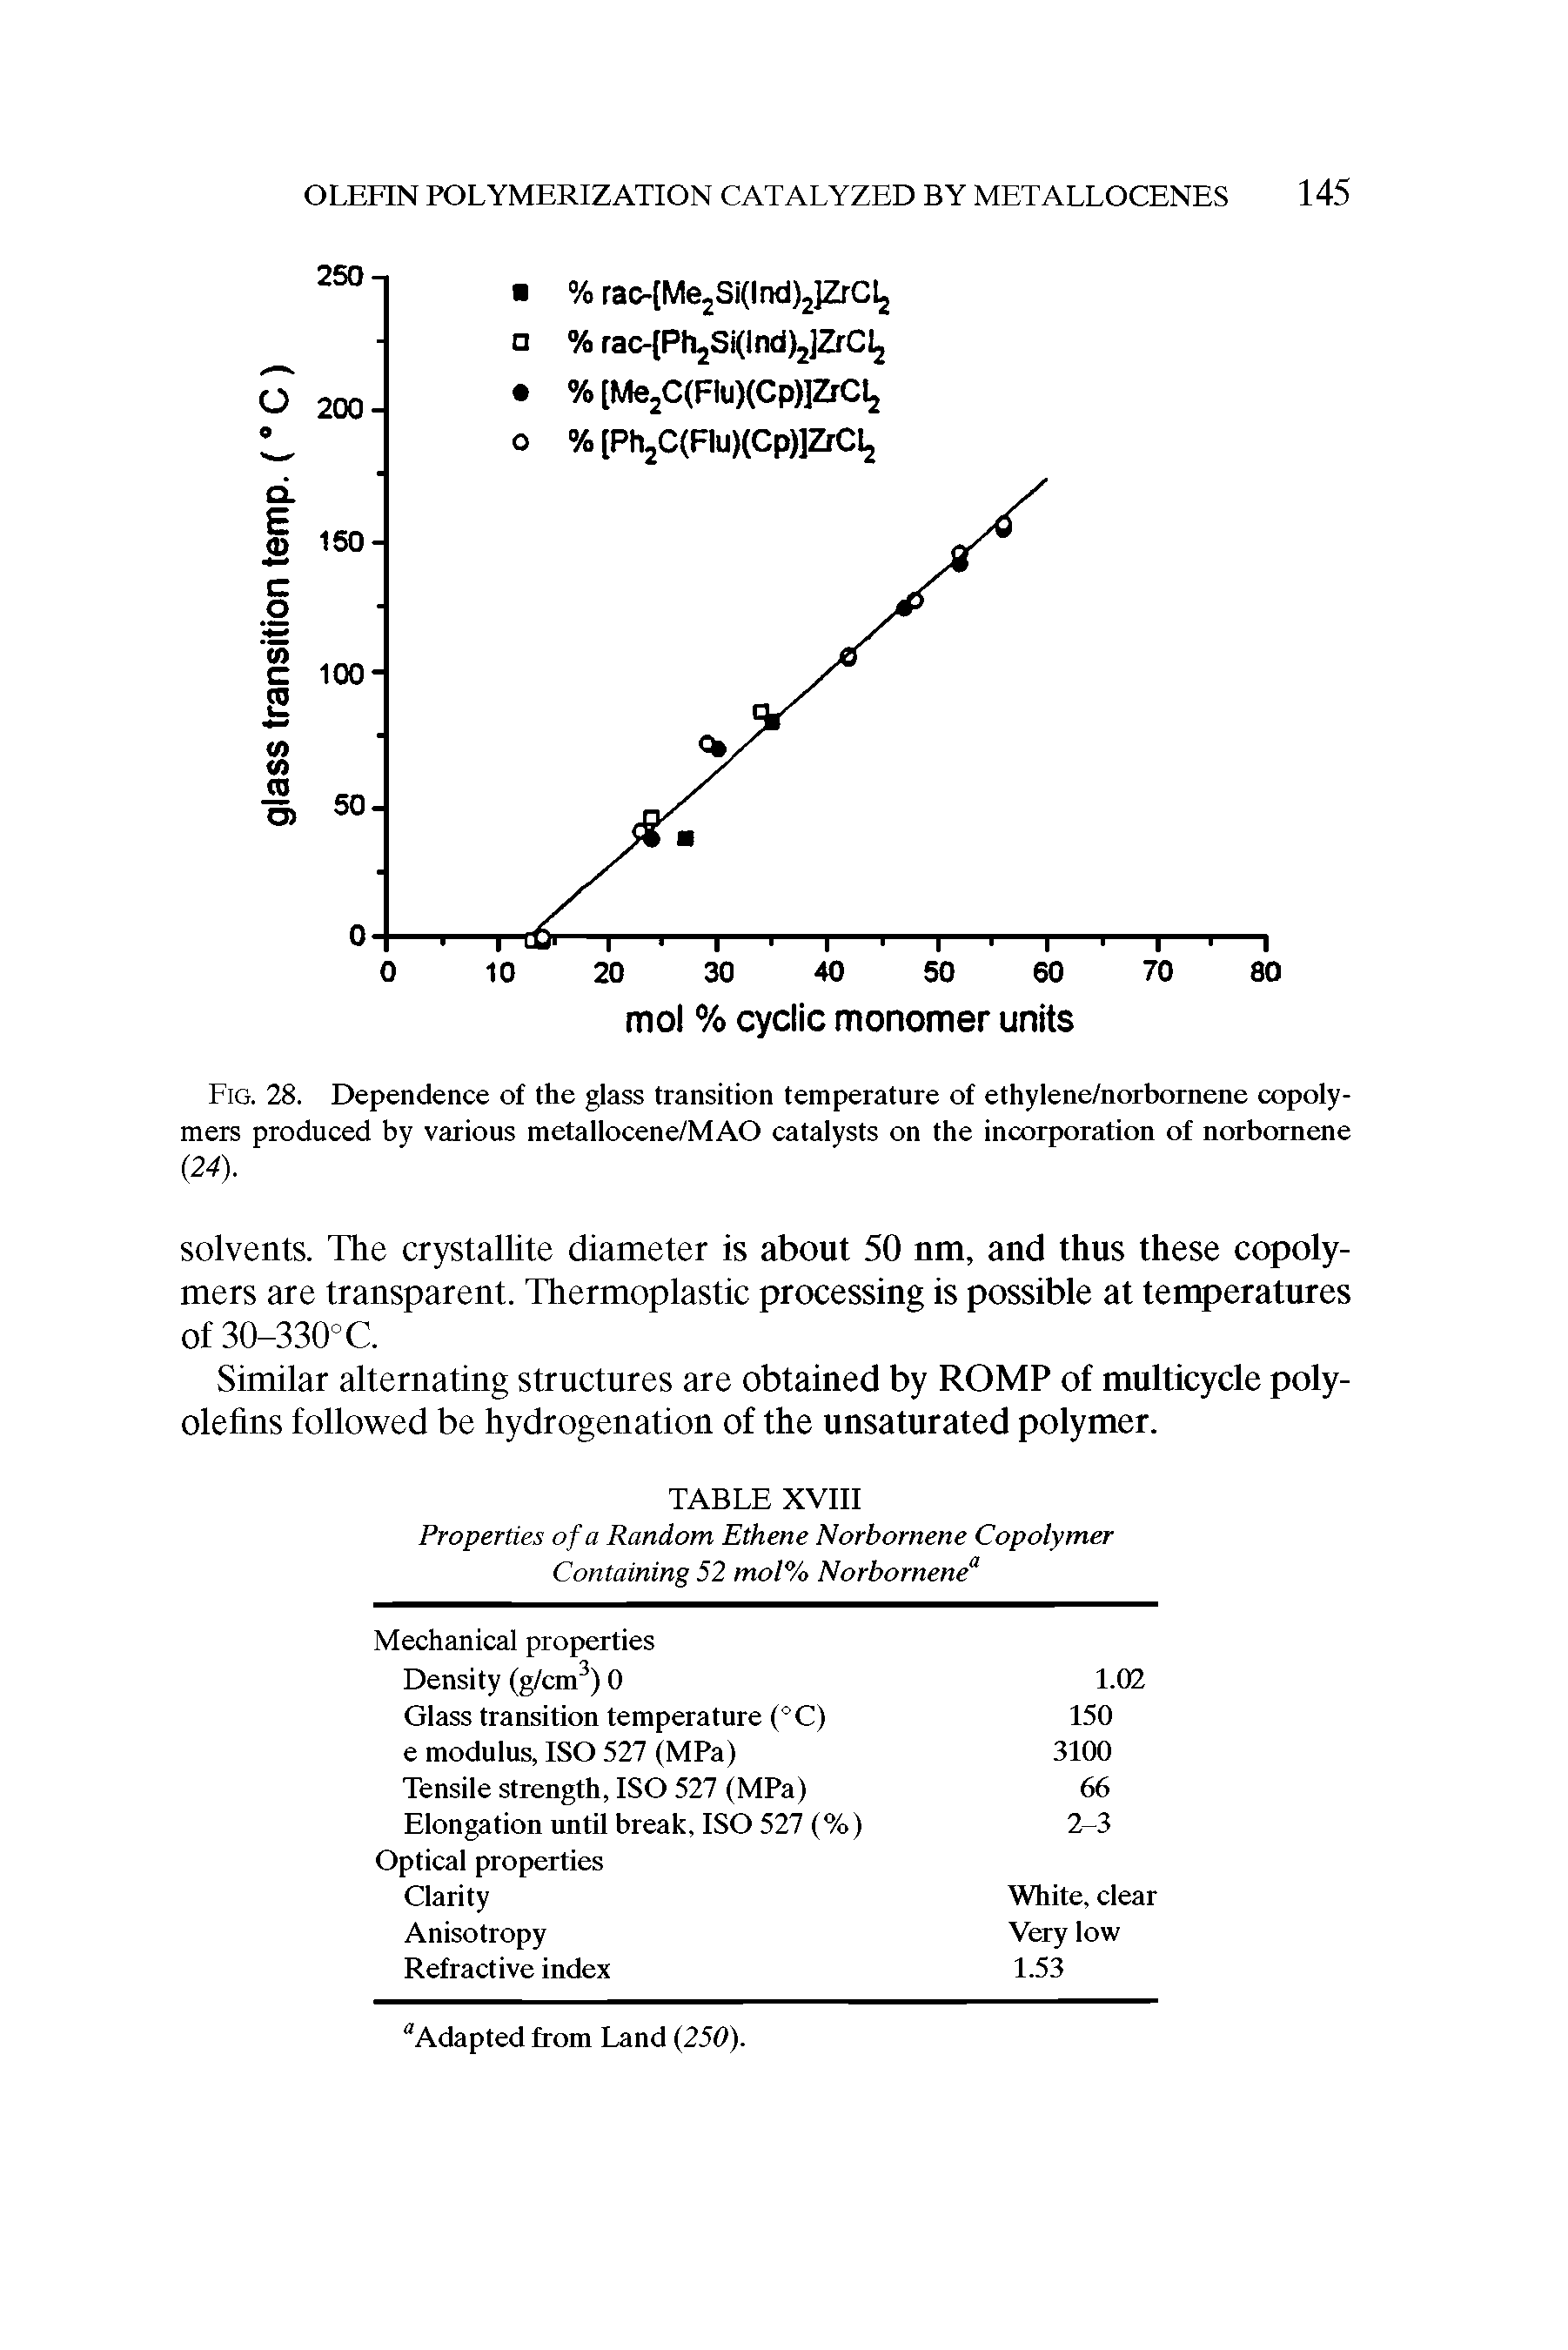 Fig. 28. Dependence of the glass transition temperature of ethylene/norbornene copolymers produced by various metallocene/MAO catalysts on the incorporation of norbornene (24).